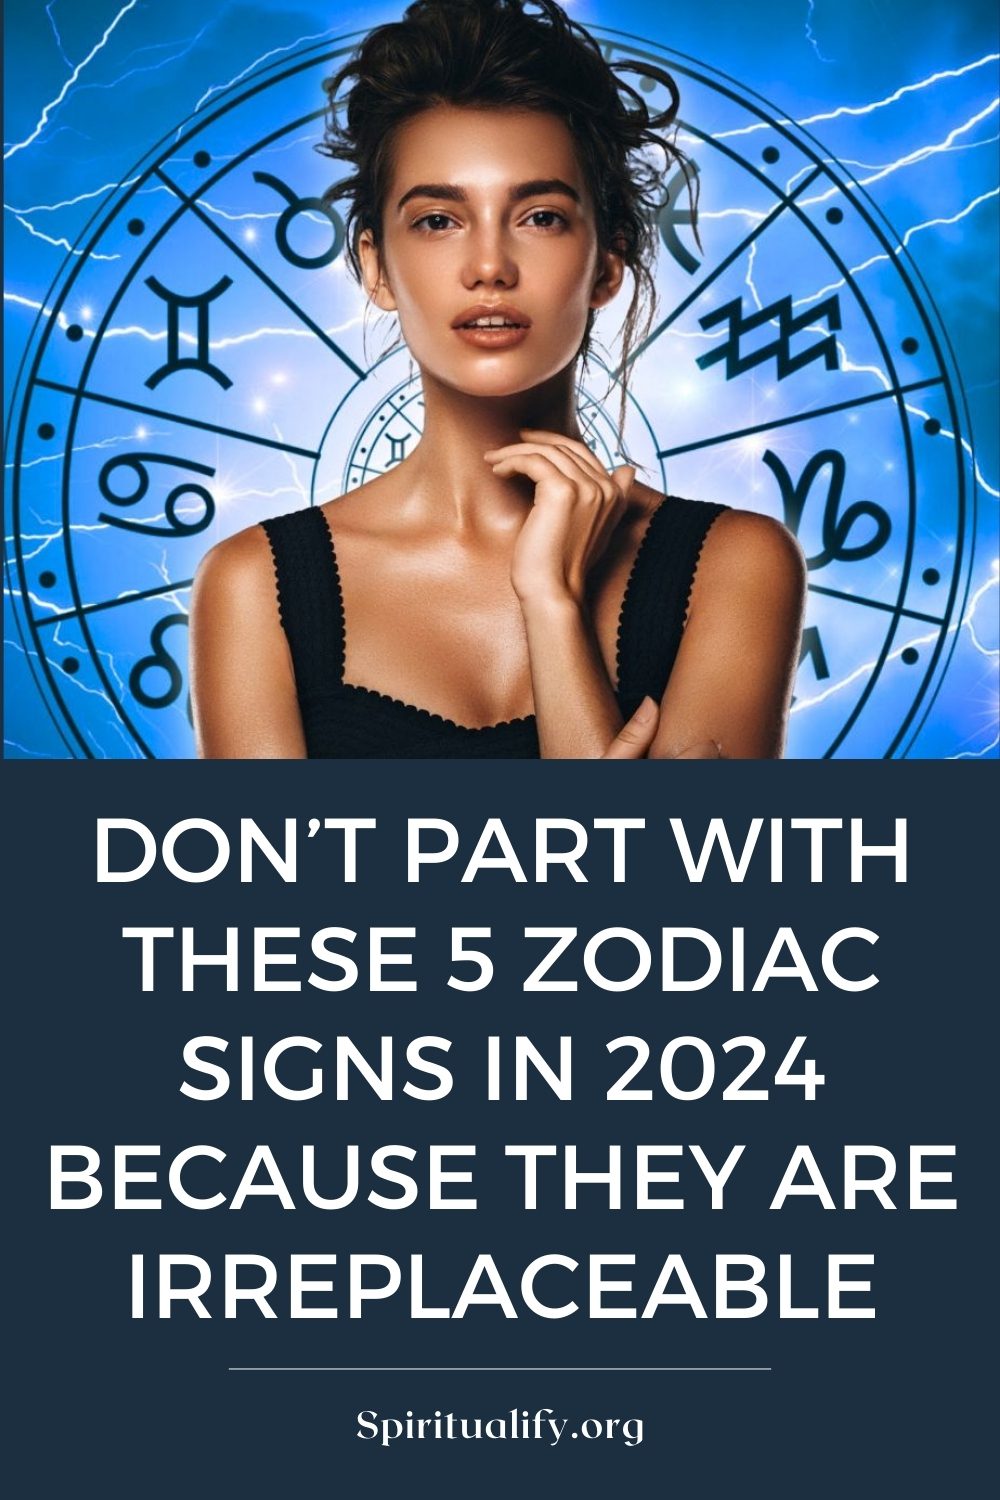 Don't Part With These 5 Zodiac Signs In 2024 Because They Are Irreplaceable